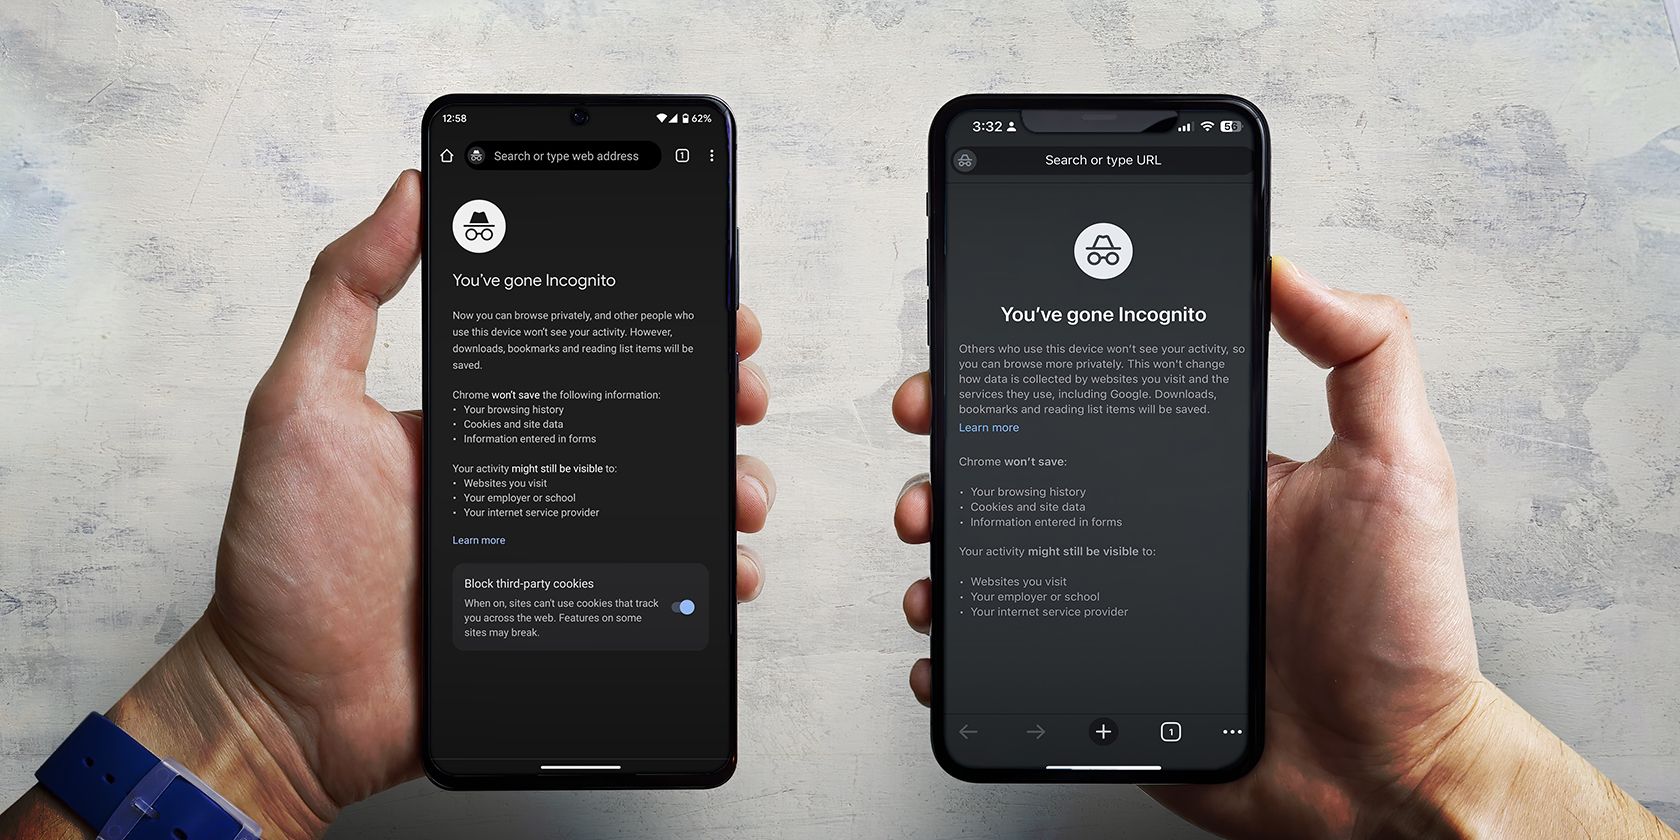 Two hands hold a smartphone and iphone with the incognito browsing mode screens displayed, promoting web privacy.